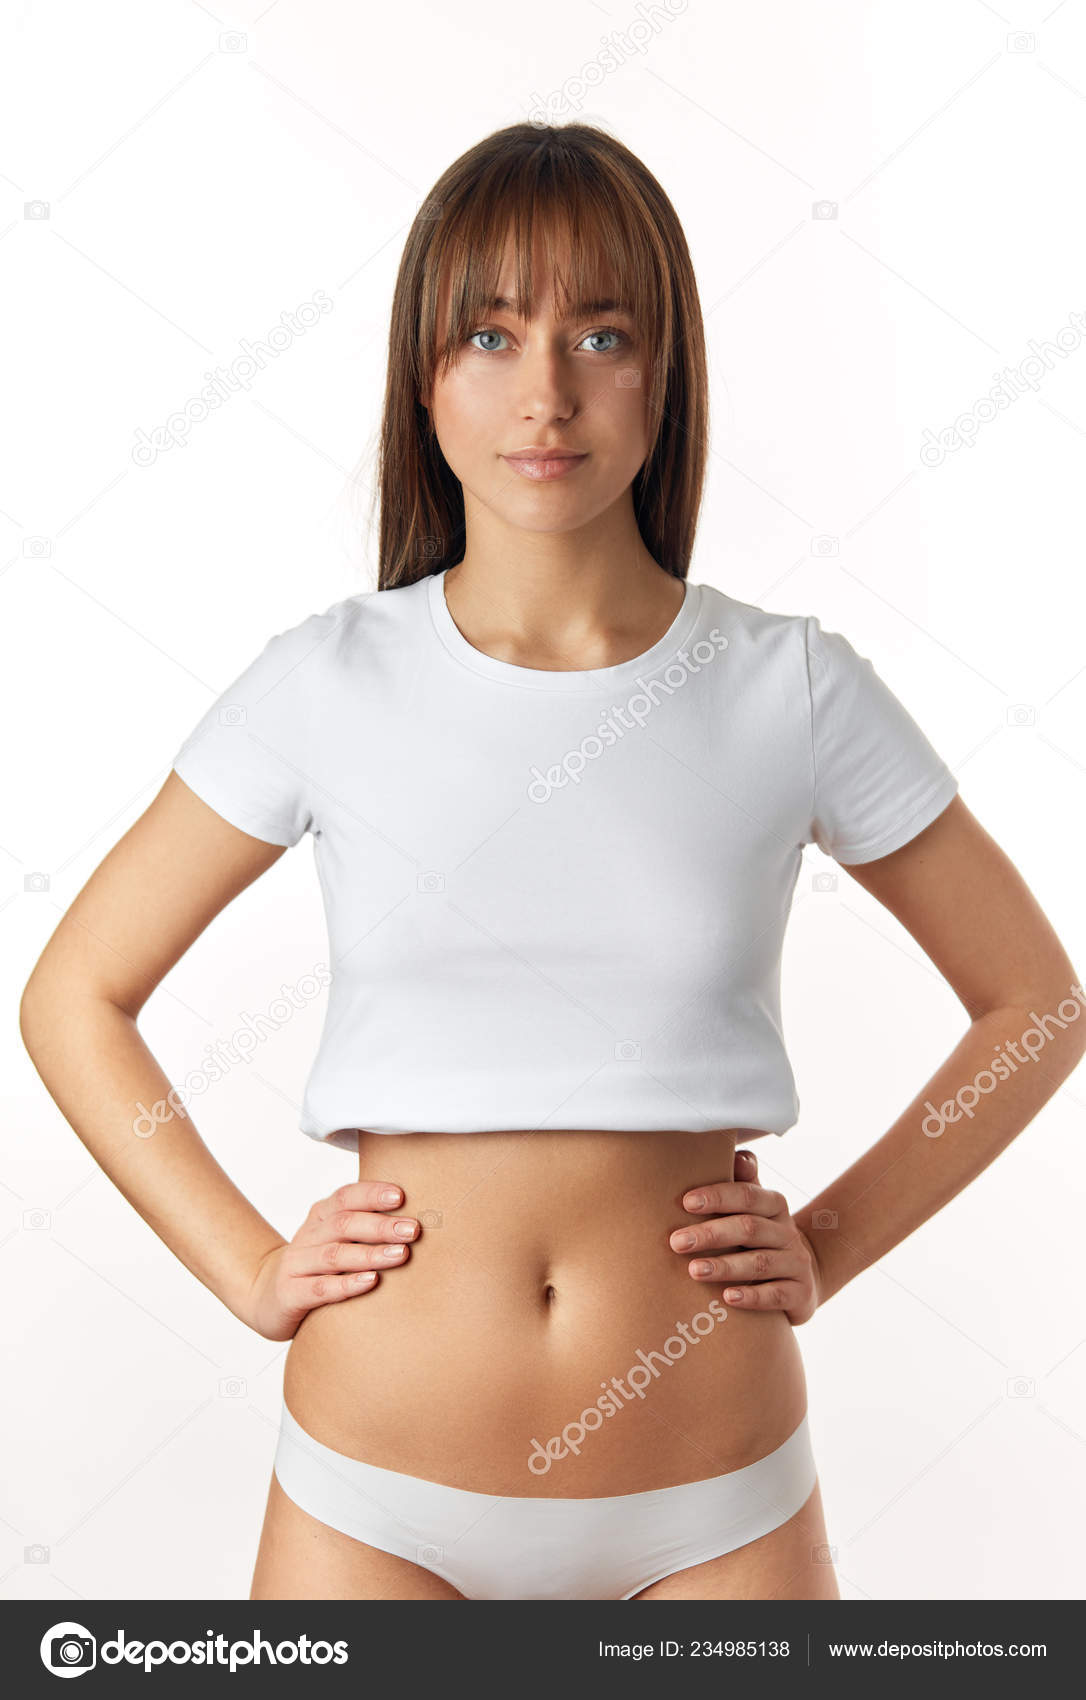 Beautiful Young Woman Dressed In White Top And Panties Shows Her Slim Body  And Flat Tummy. Girl With Perfect Body Shape, Flat Belly In Underwear.  Health, Hygiene Concepts. Stock Photo, Picture and